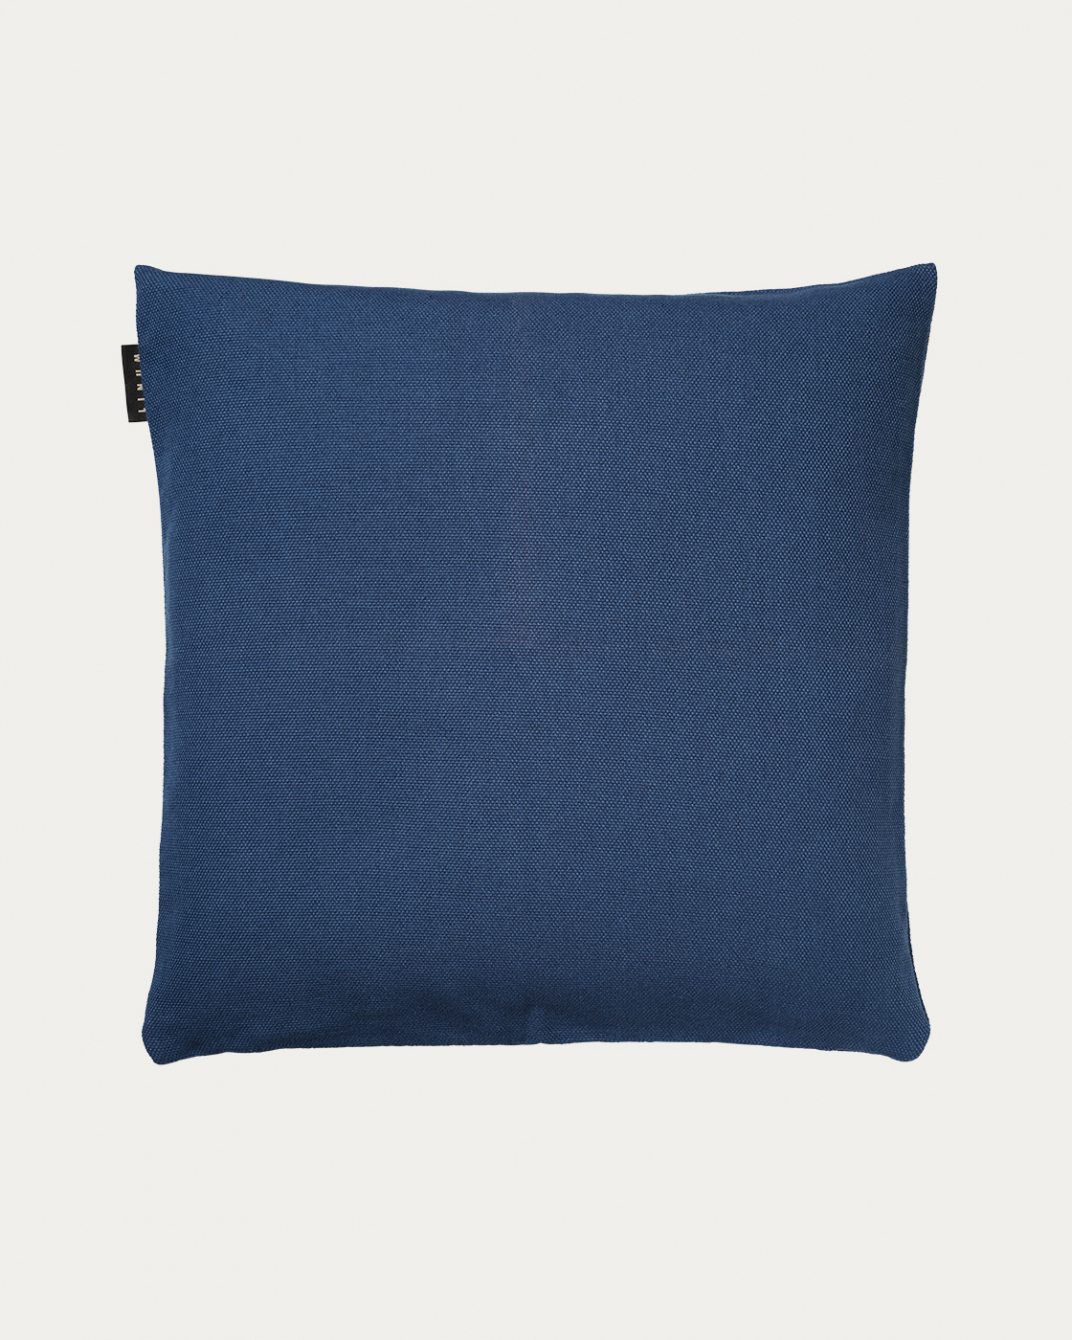 Product image indigo blue PEPPER cushion cover made of soft cotton from LINUM DESIGN. Easy to wash and durable for generations. Size 50x50 cm.